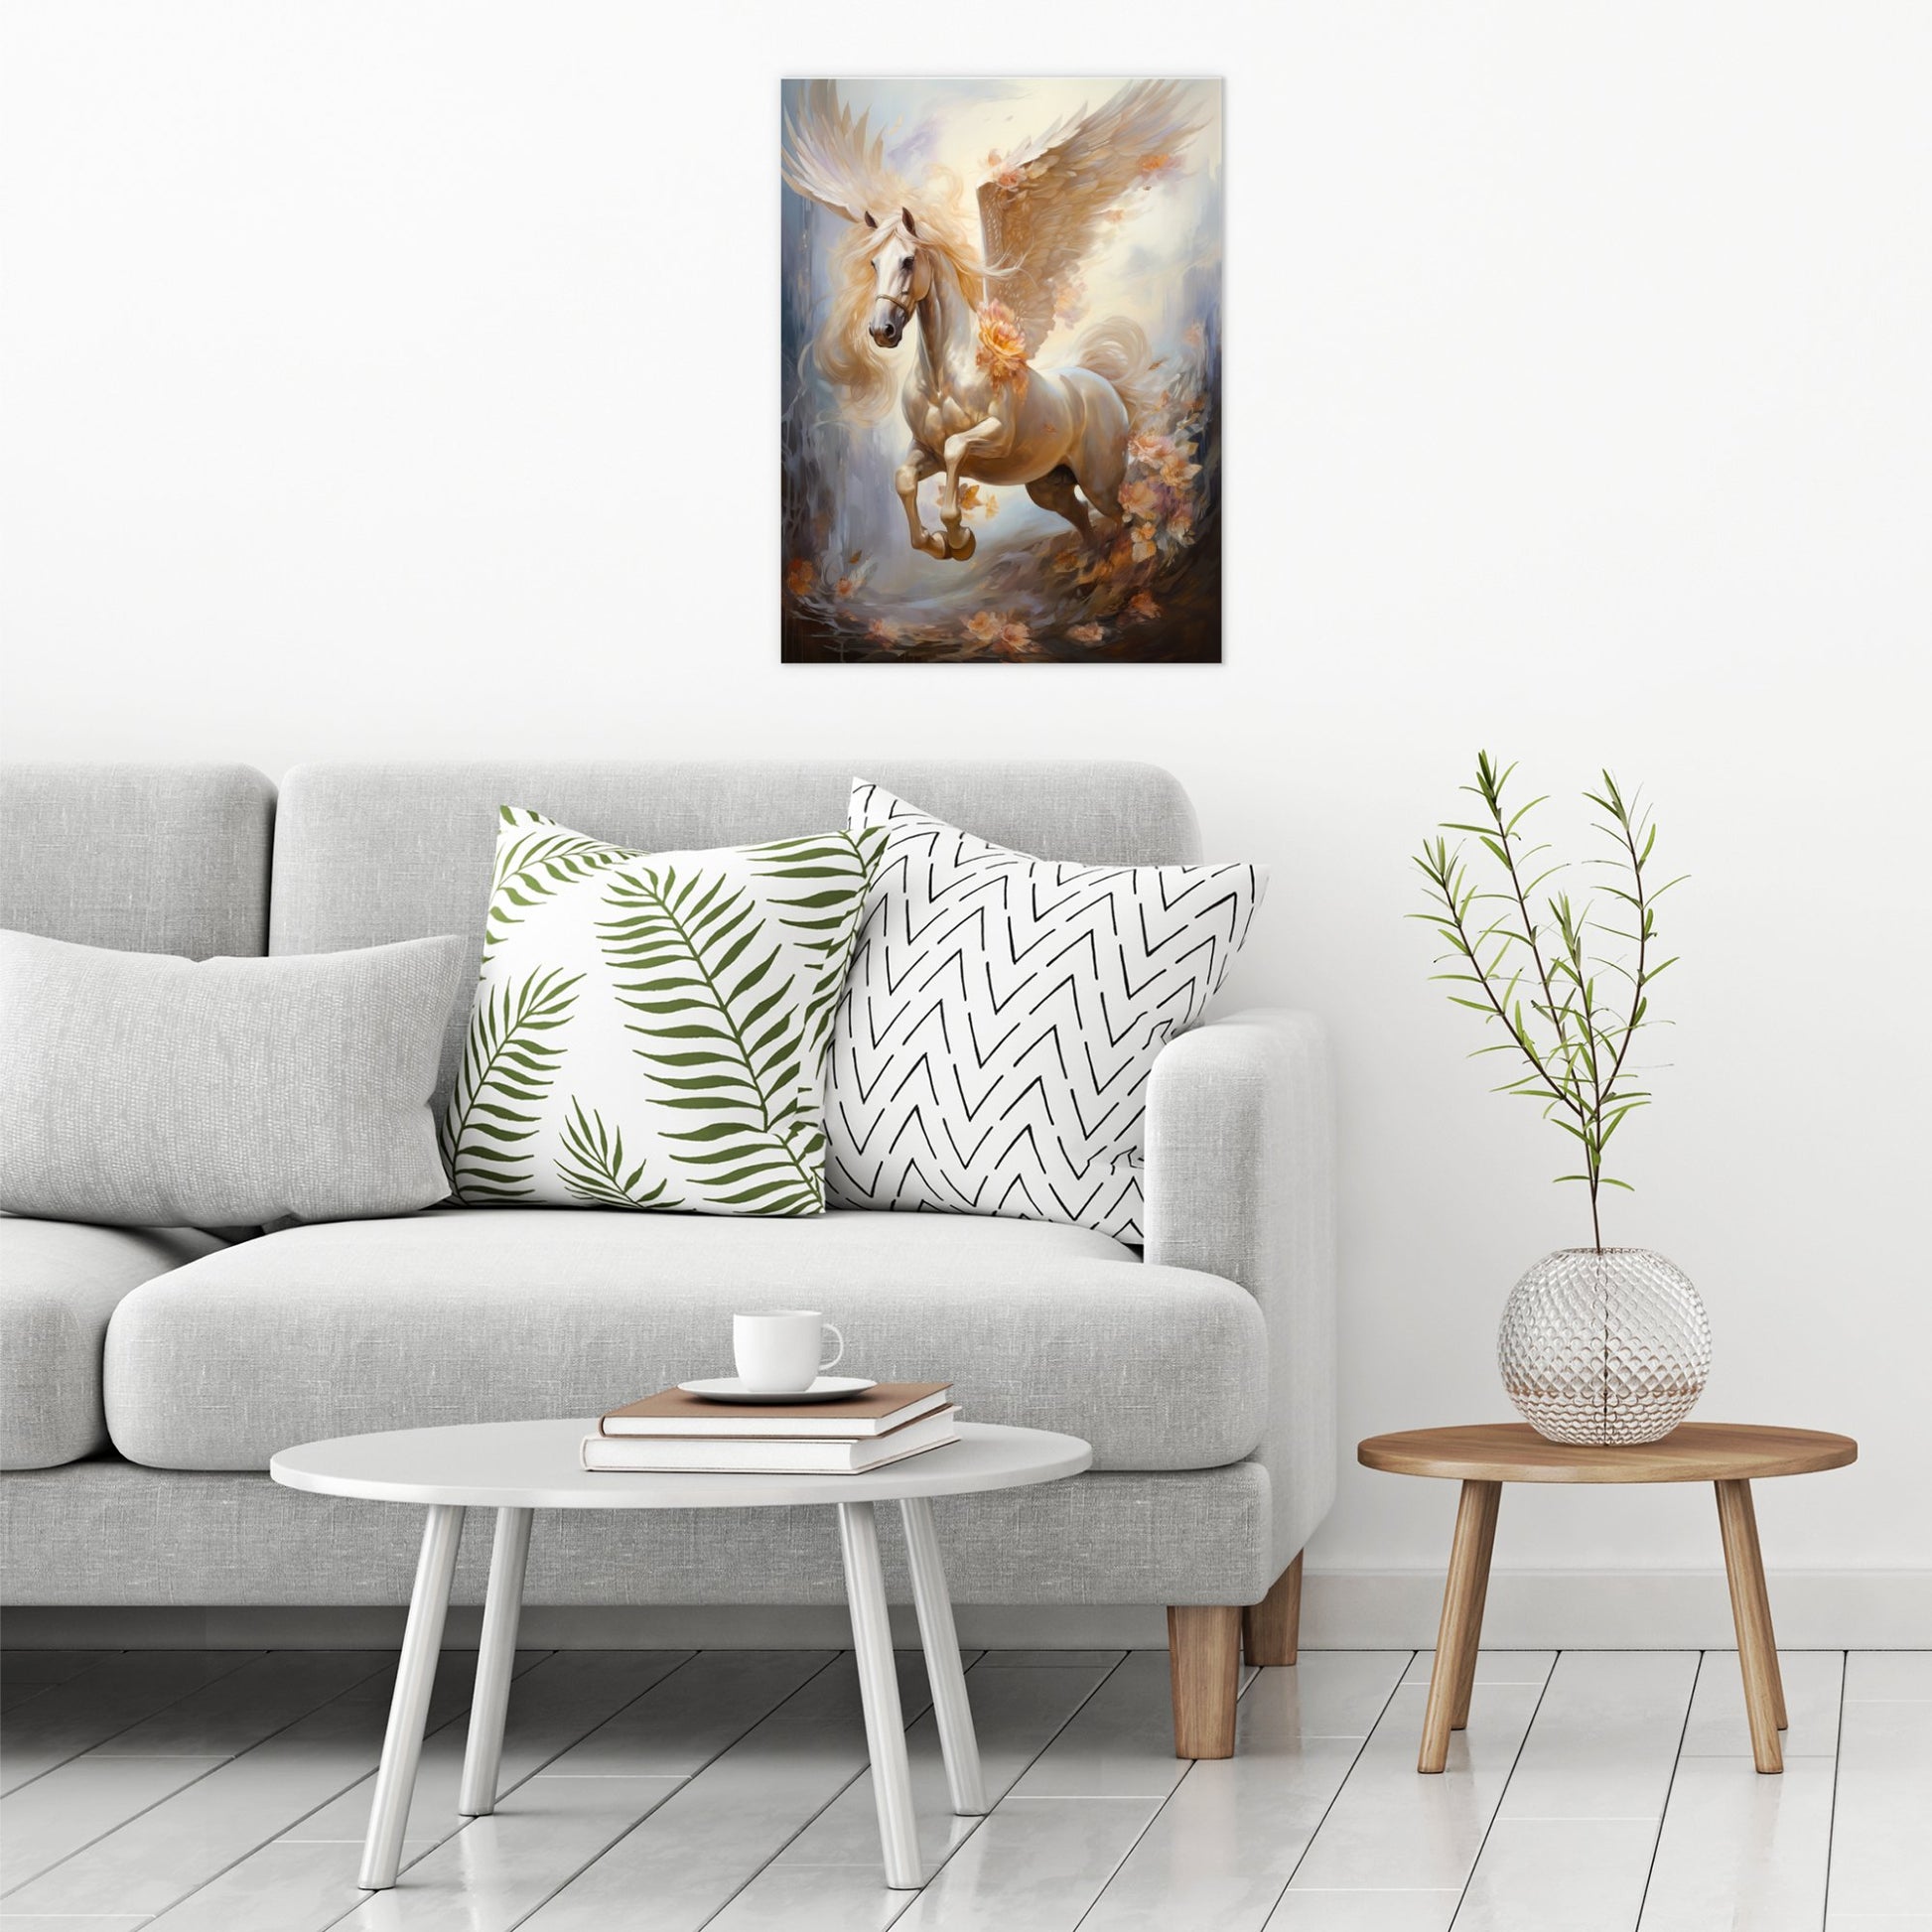 A contemporary modern room view showing a large size metal art poster display plate with printed design of a Pegasus Flying Horse Fantasy Painting